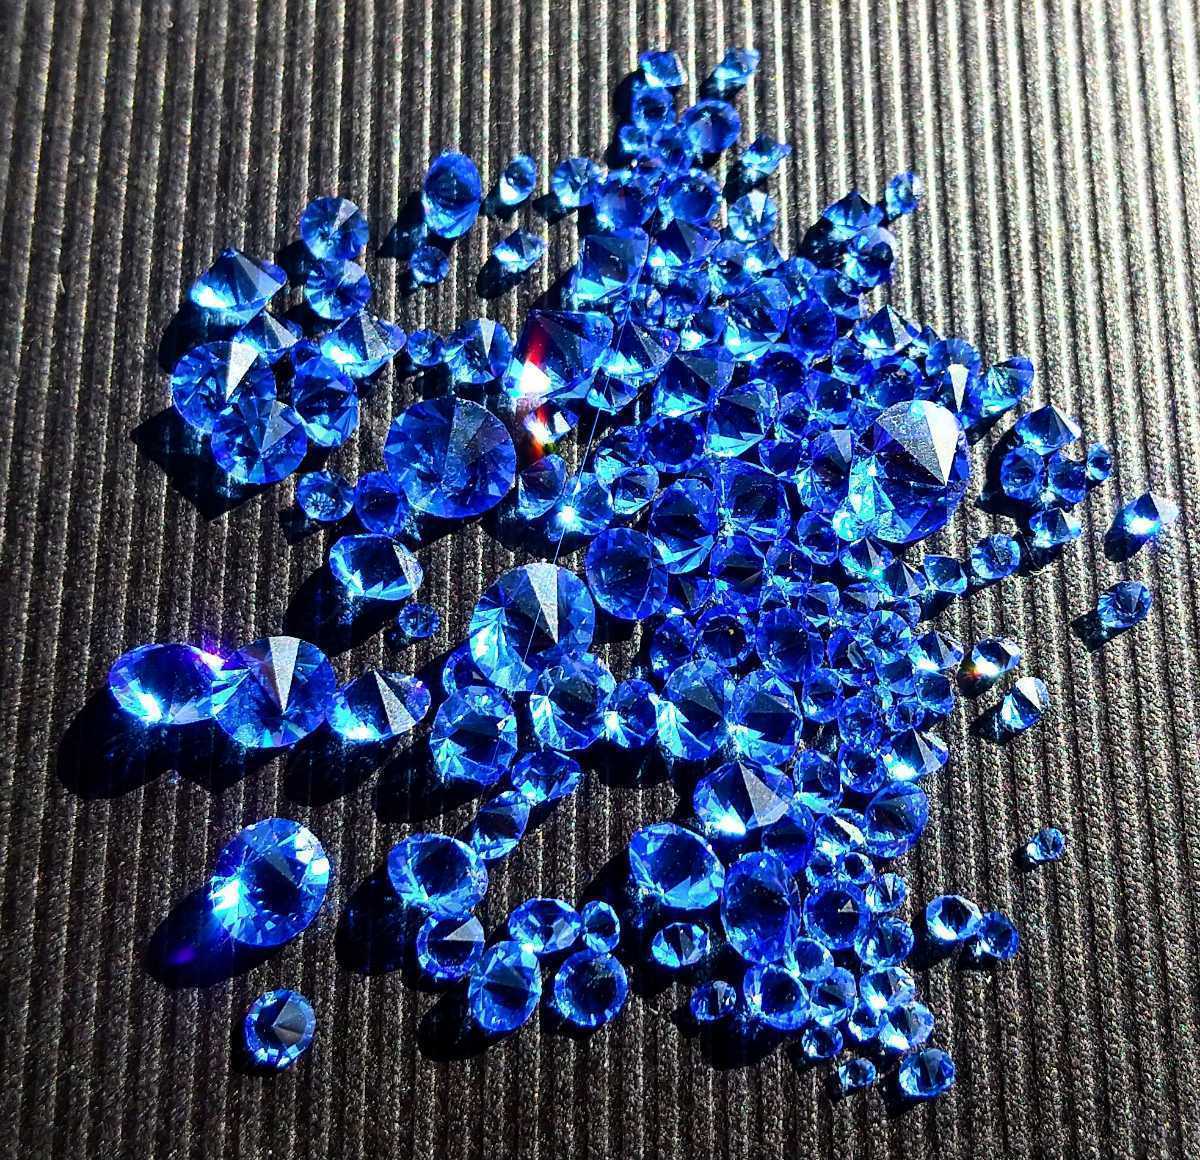 # Swarovski crystal [pi comb - edge ] approximately 12g large small 9 kind size. edge approximately 750 bead nail art deco parts accessory raw materials 